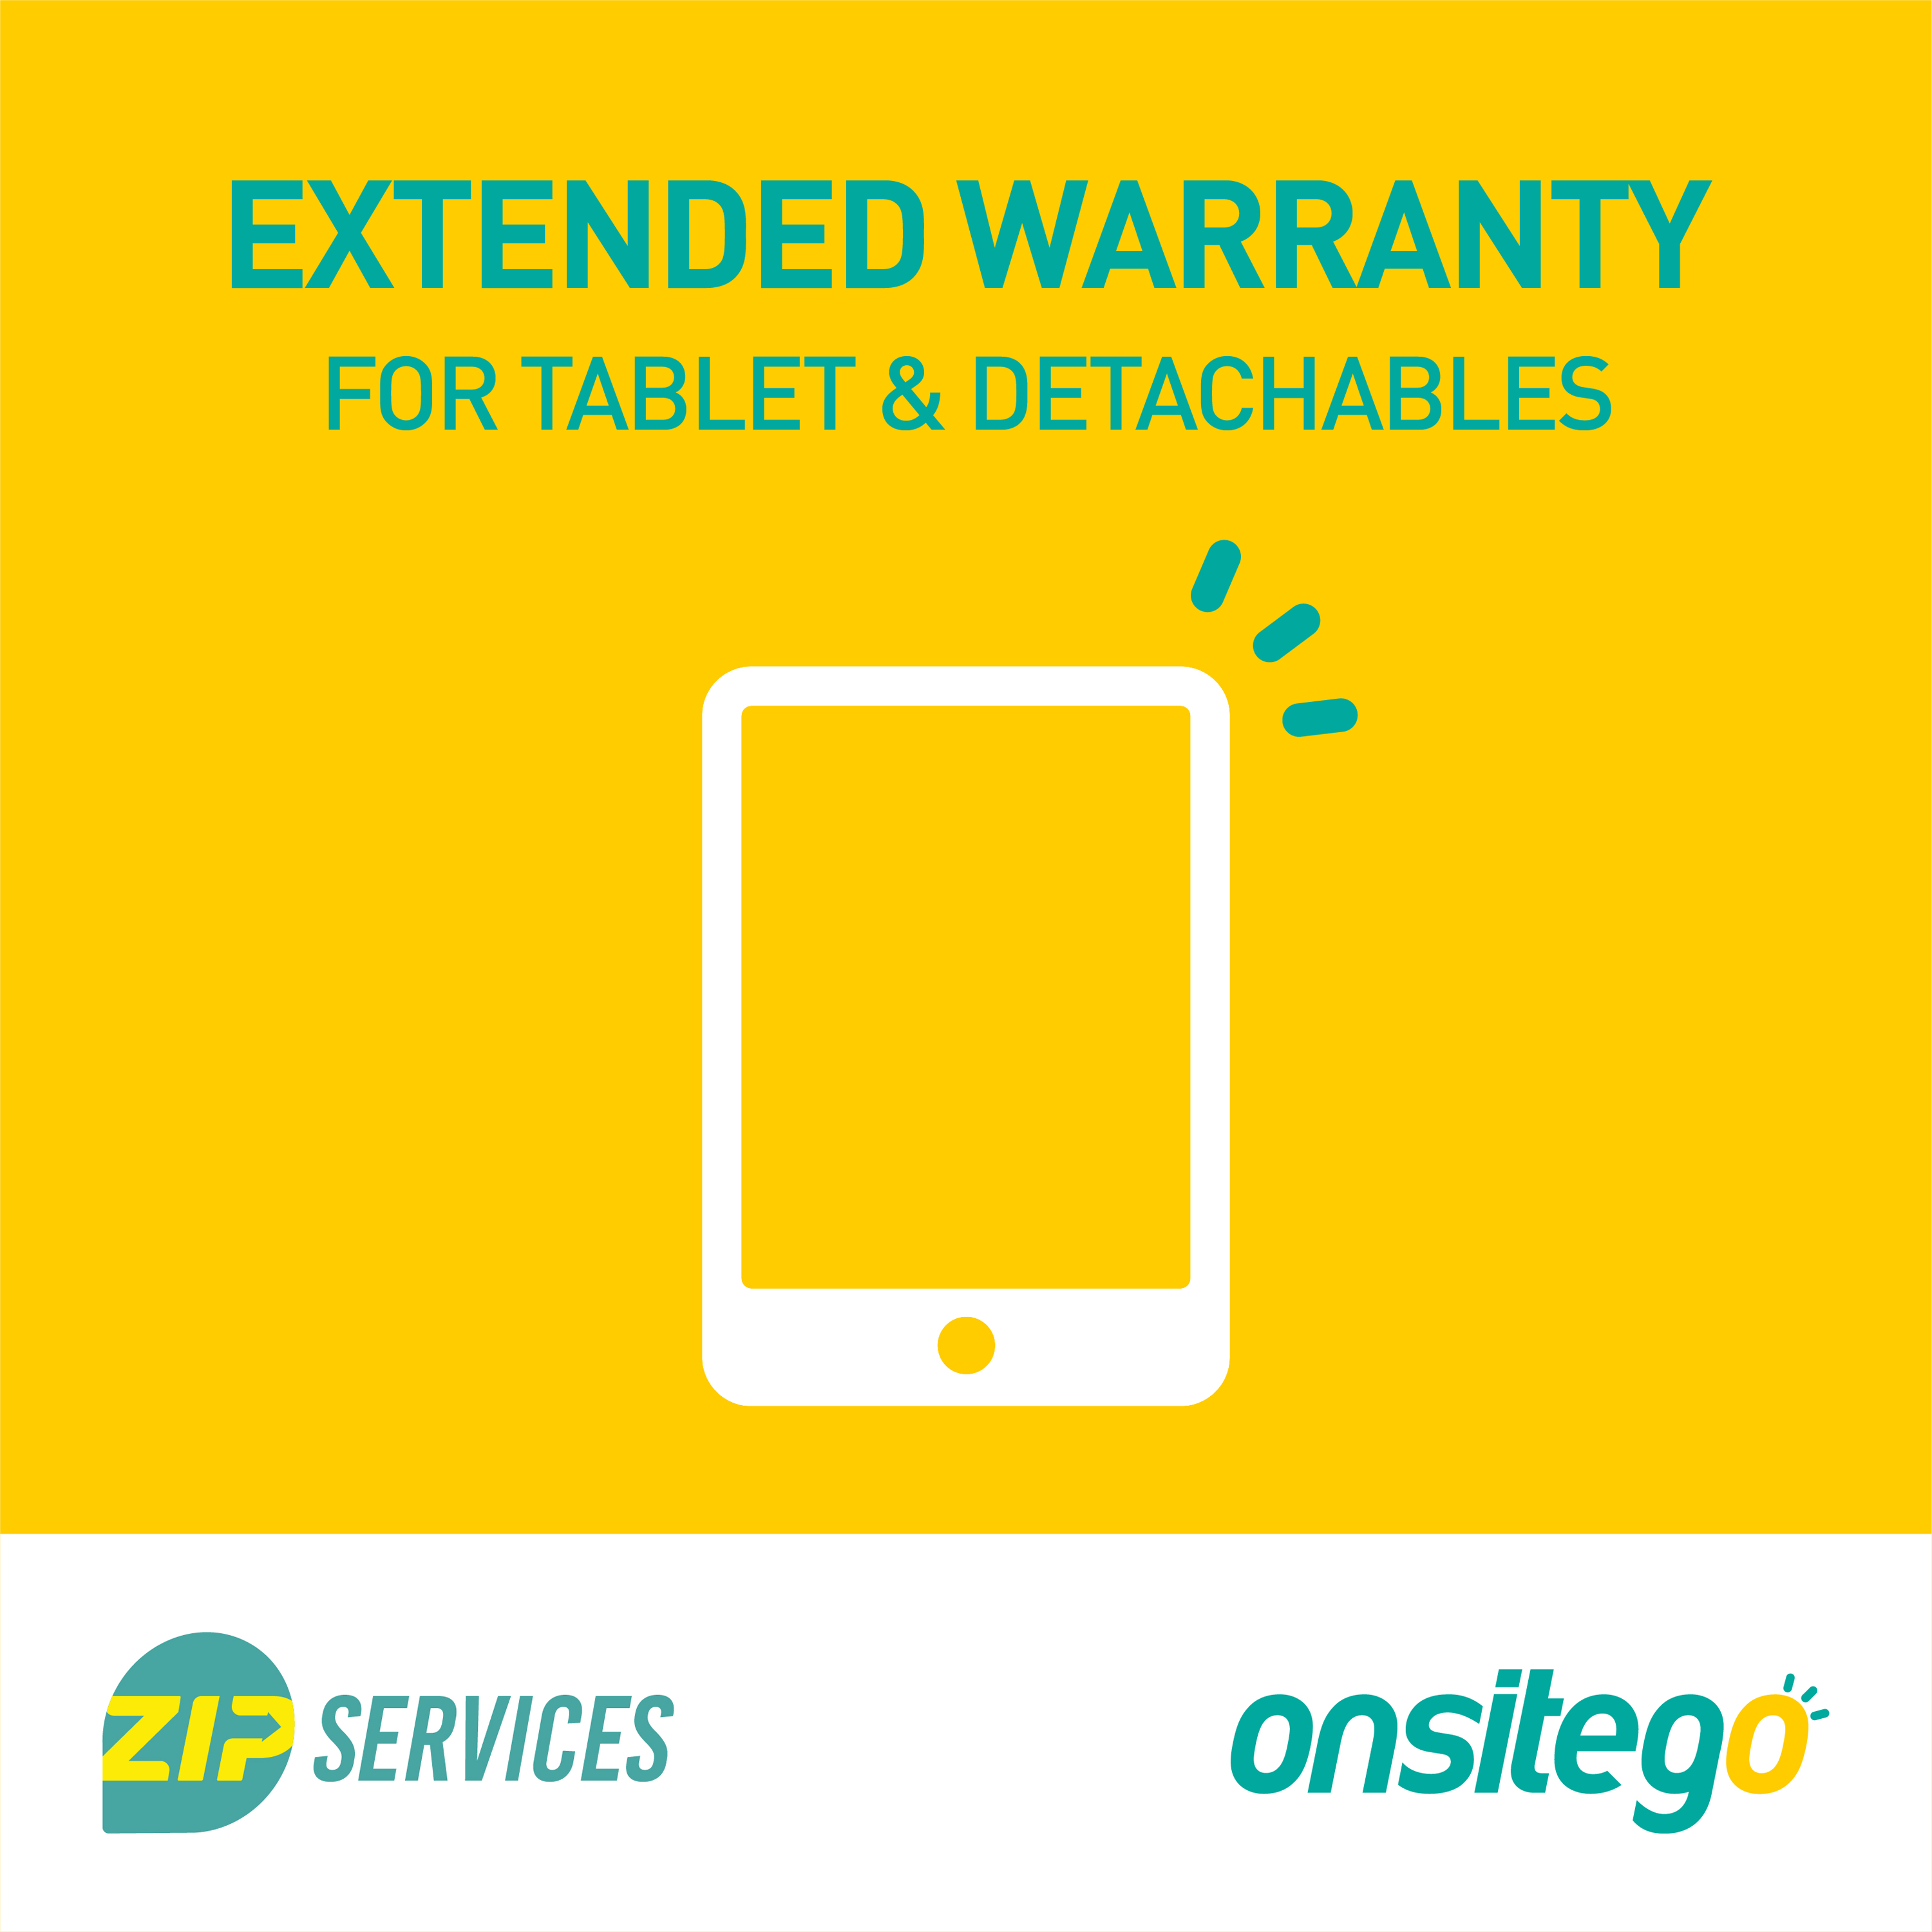 Onsitego 3 Months Extended Warranty for Tablets Rs.190001 - Rs.200000_1